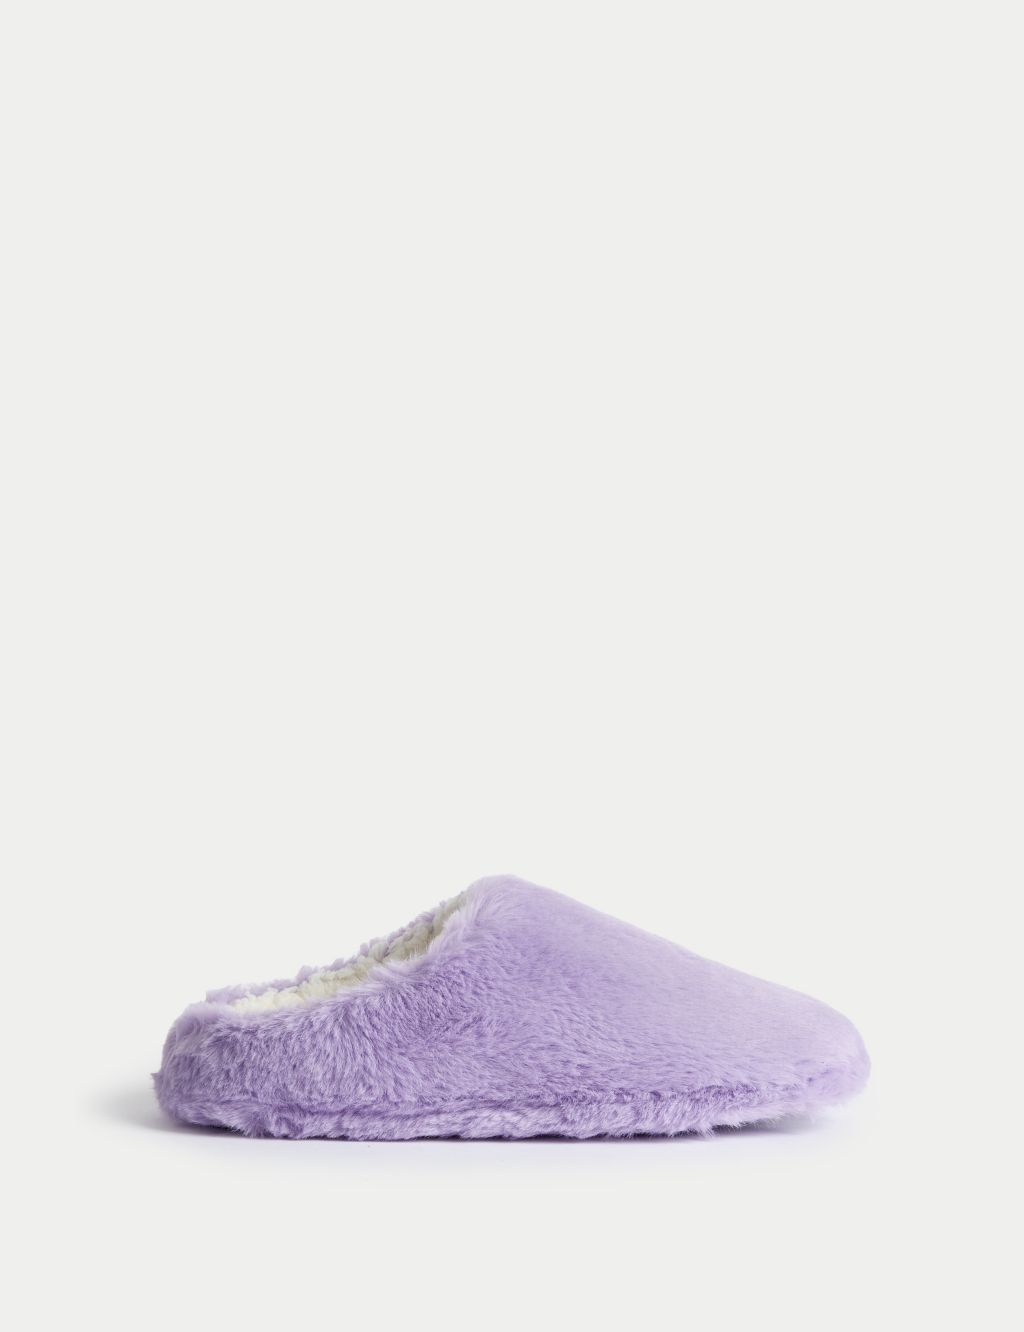 Kids' Faux Fur Slippers (13 Small - 6 Large) image 1